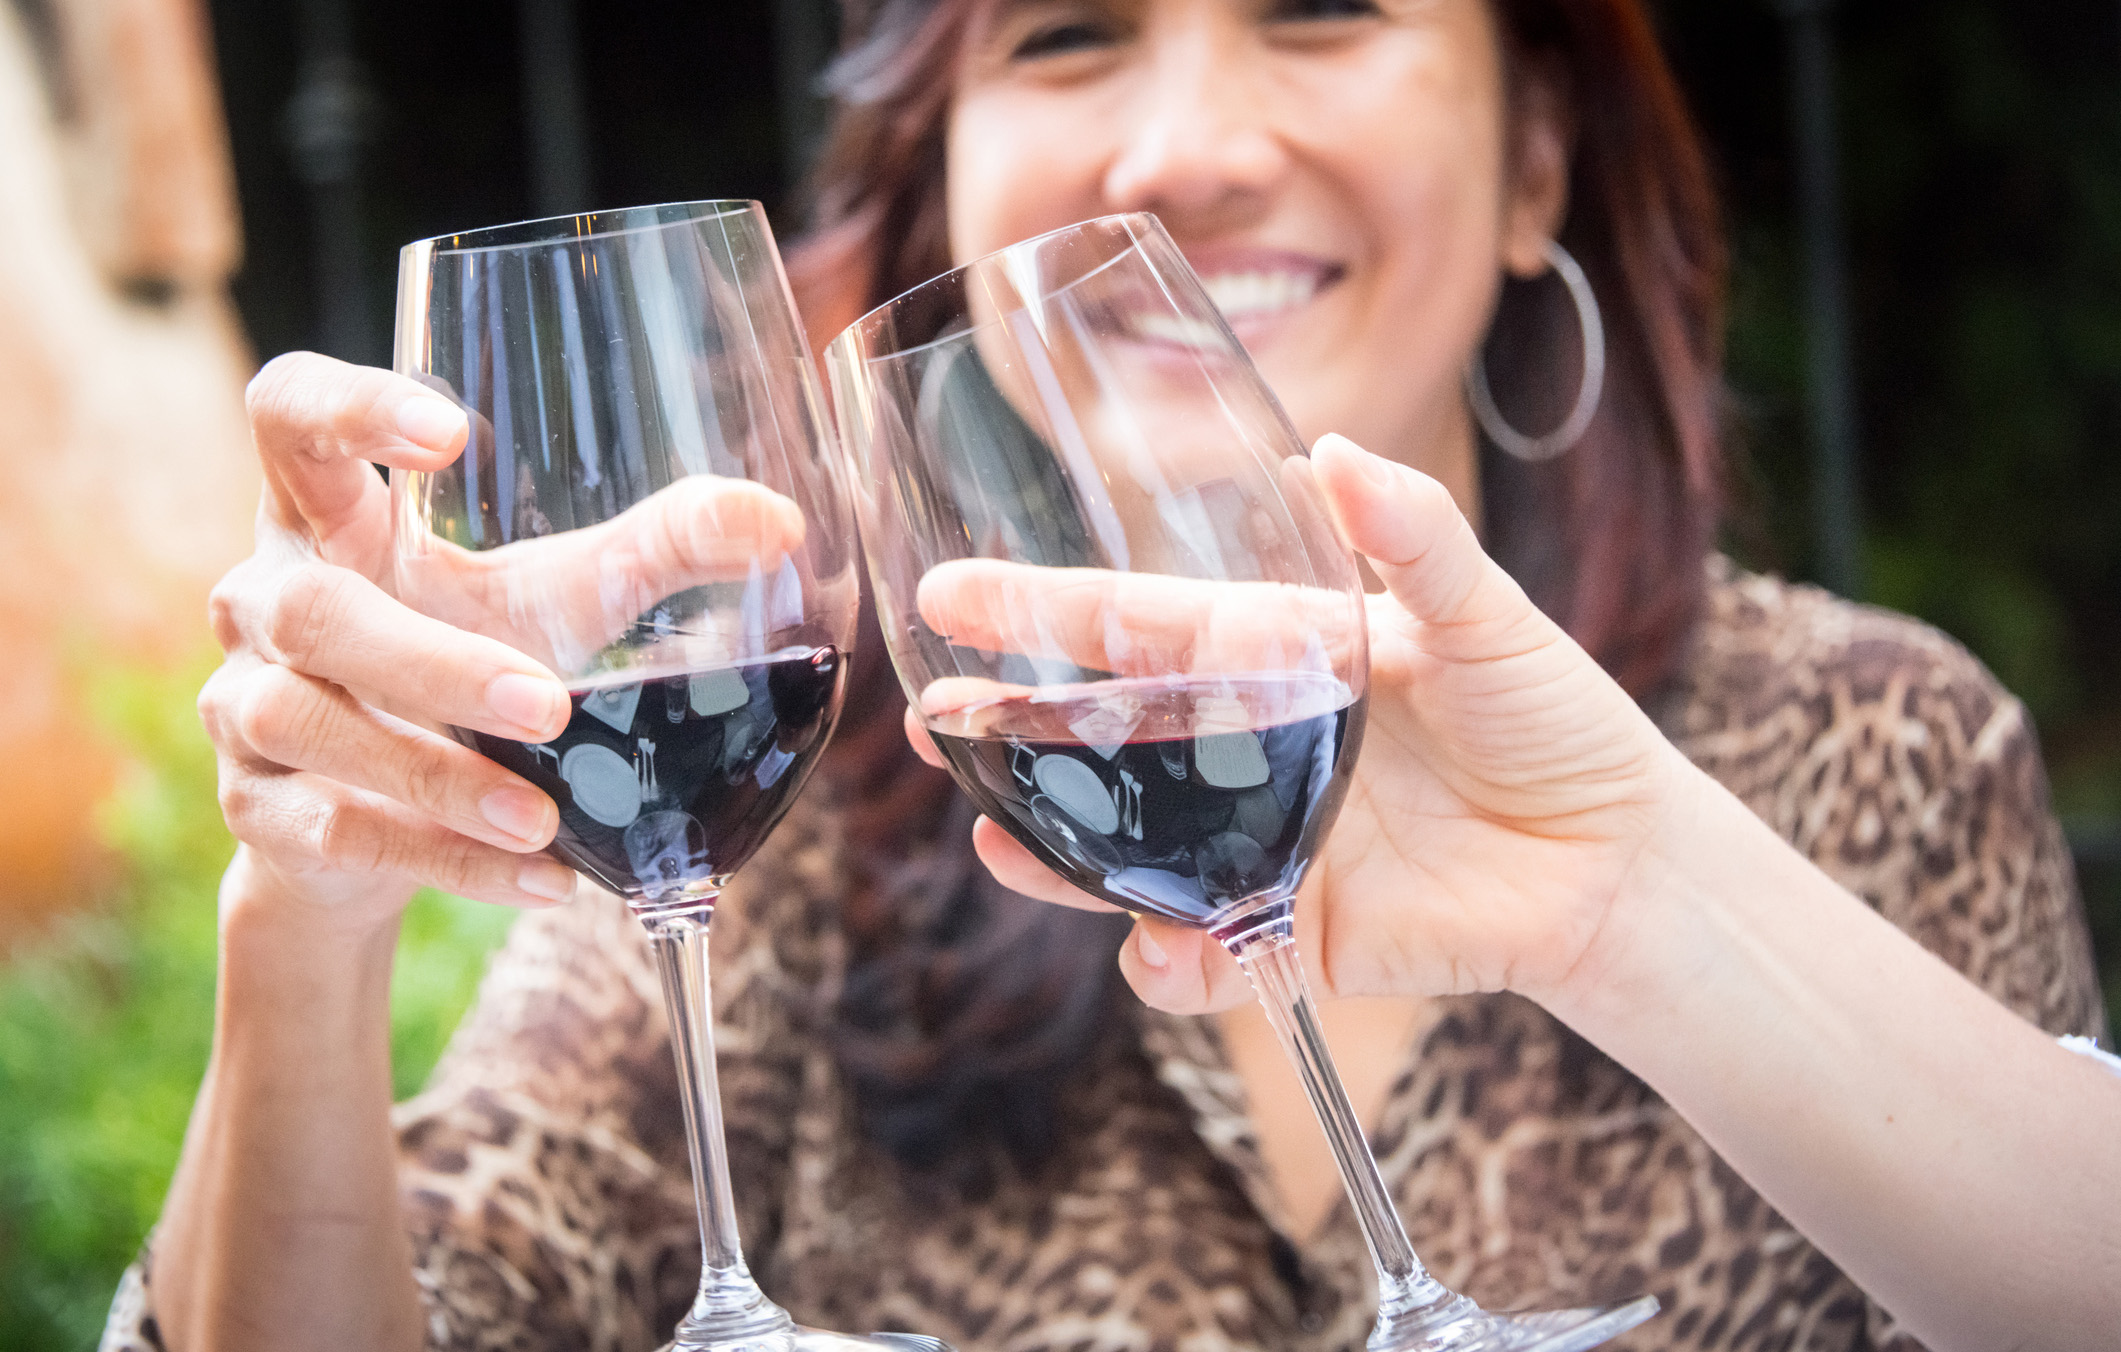 A tasting is never too far away in Sonoma County, so grab a glass, and get started.